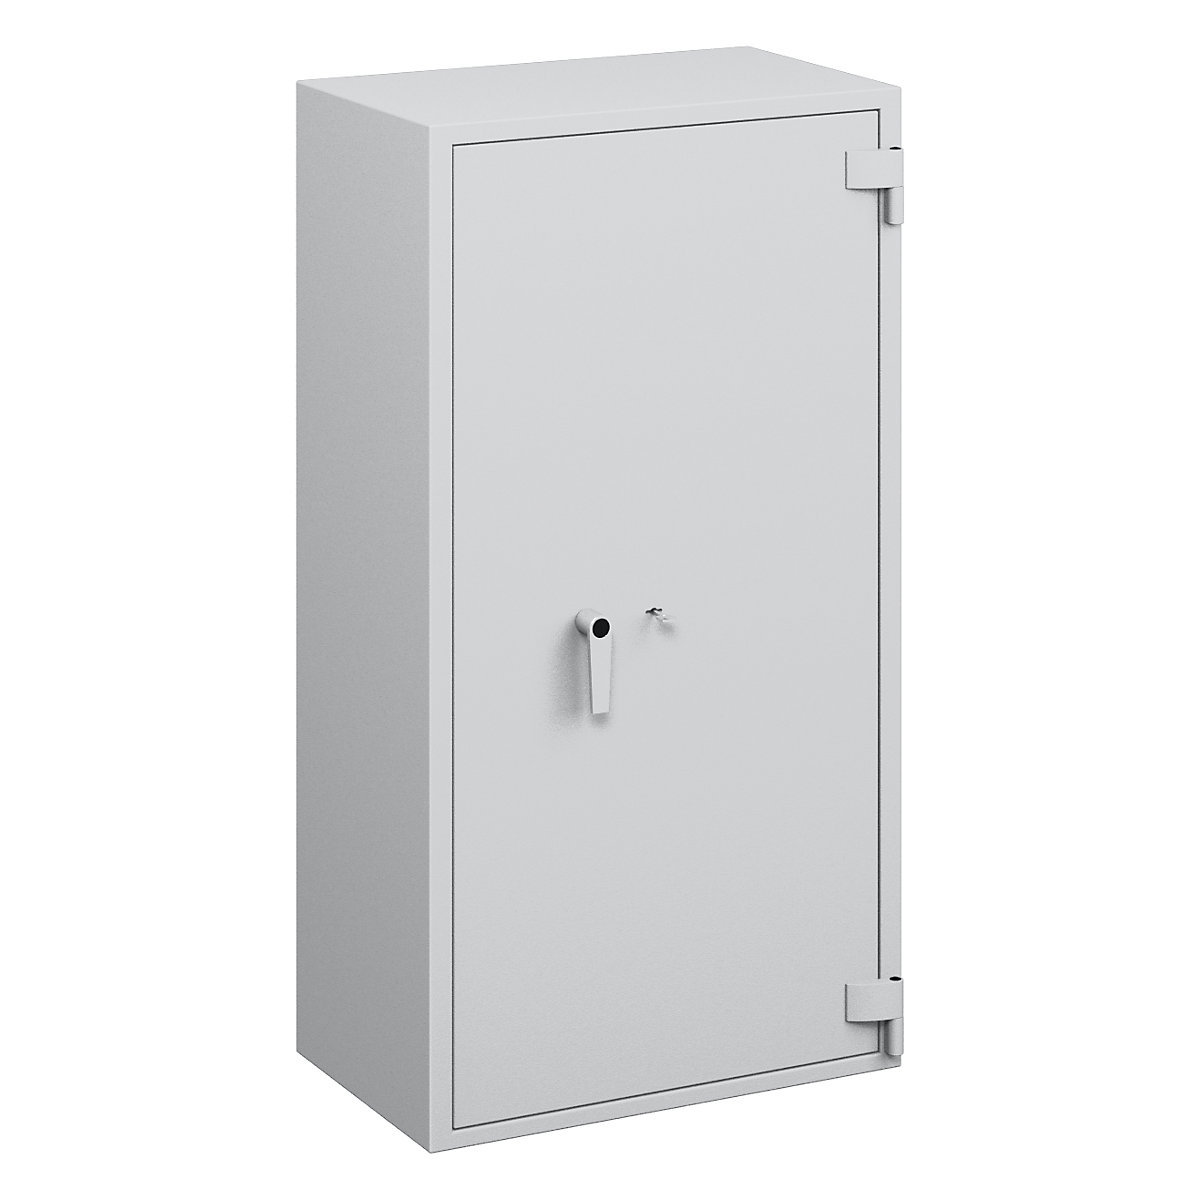 Fire resistant safety cabinet, VDMA B, S2, S 60 P, HxWxD 1322 x 704 x 471 mm-6